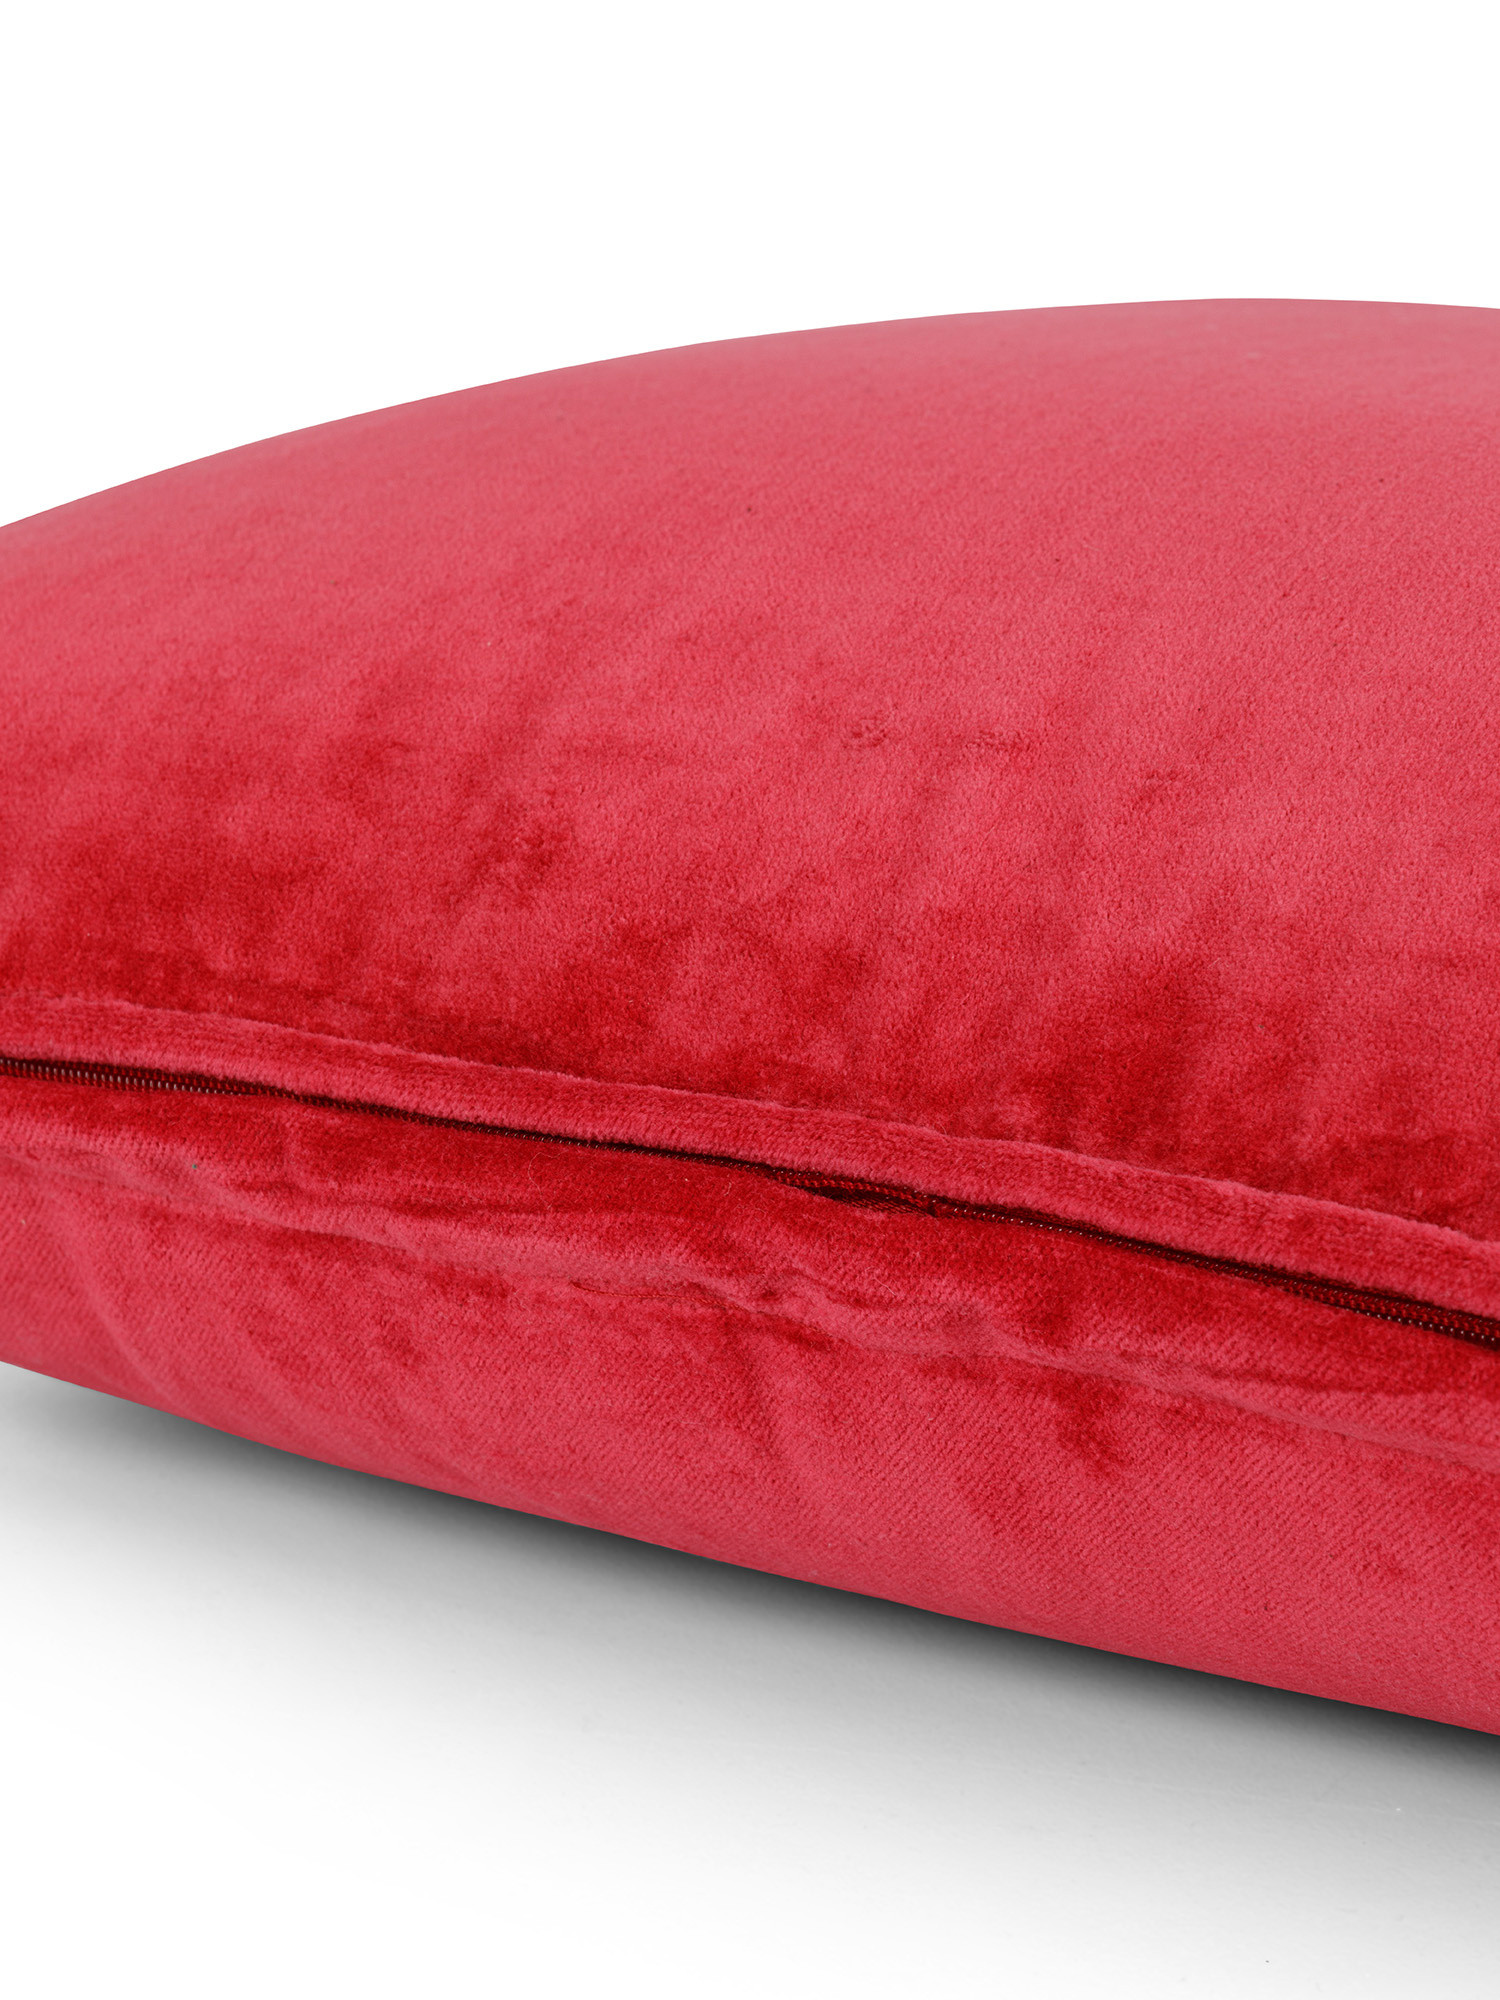 Velvet cushion with piping 45x45 cm, Red, large image number 1